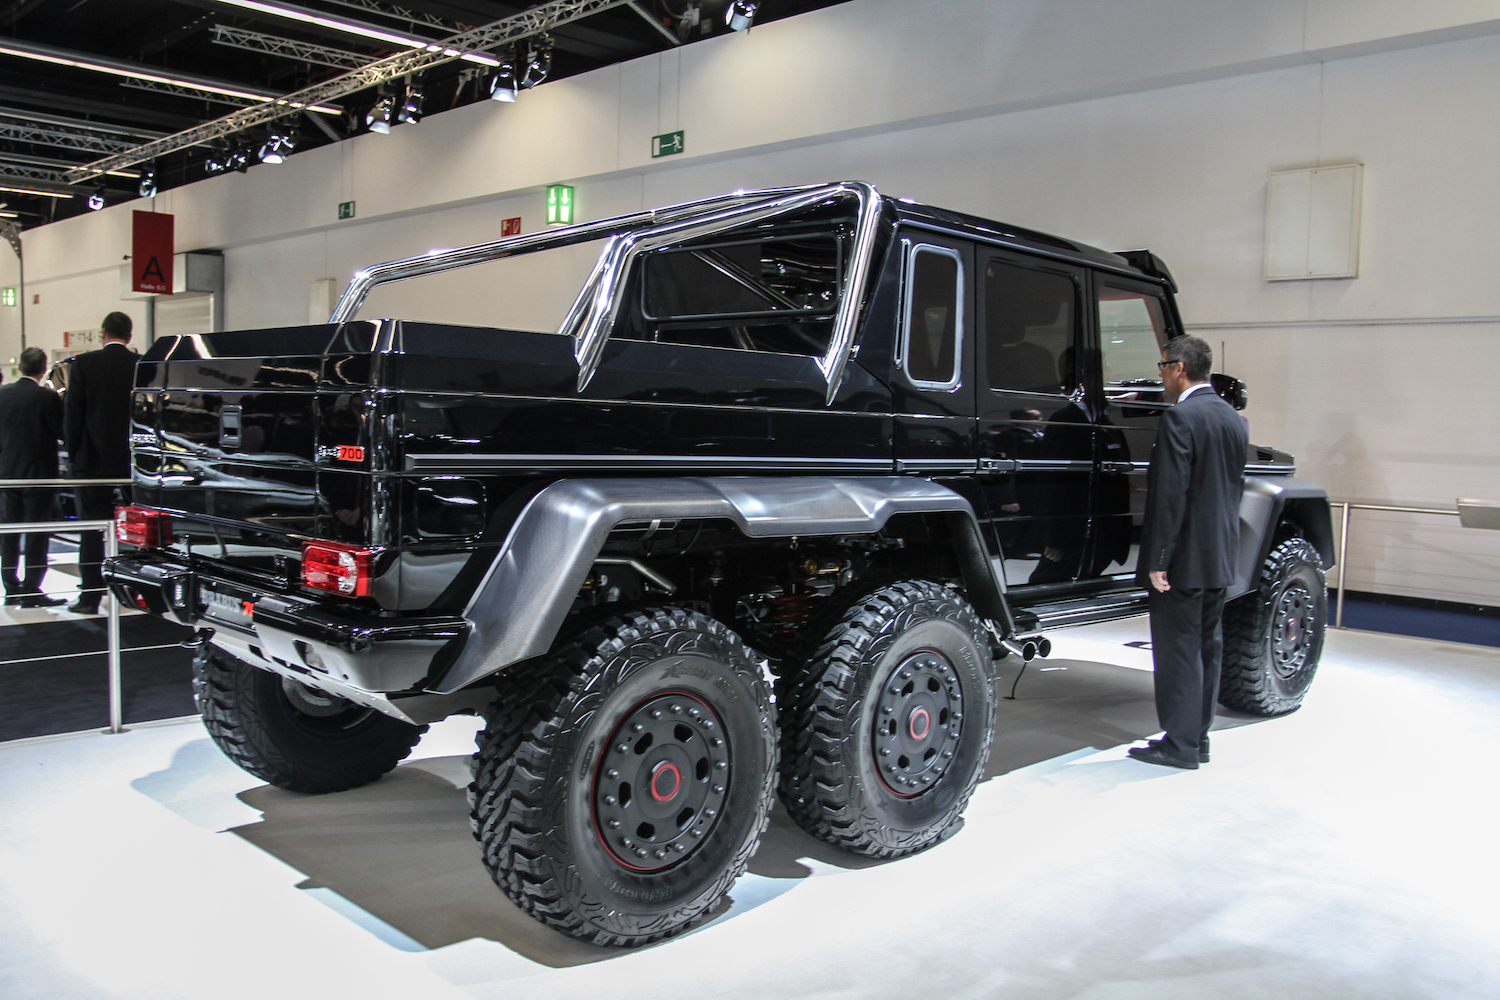 the wealthy Use section 179  "hummer Loophole" To Get Trucks and Suvs for FreeMercedes Brabus 6x6 | Gerlach Delissen/Corbis via Getty Images